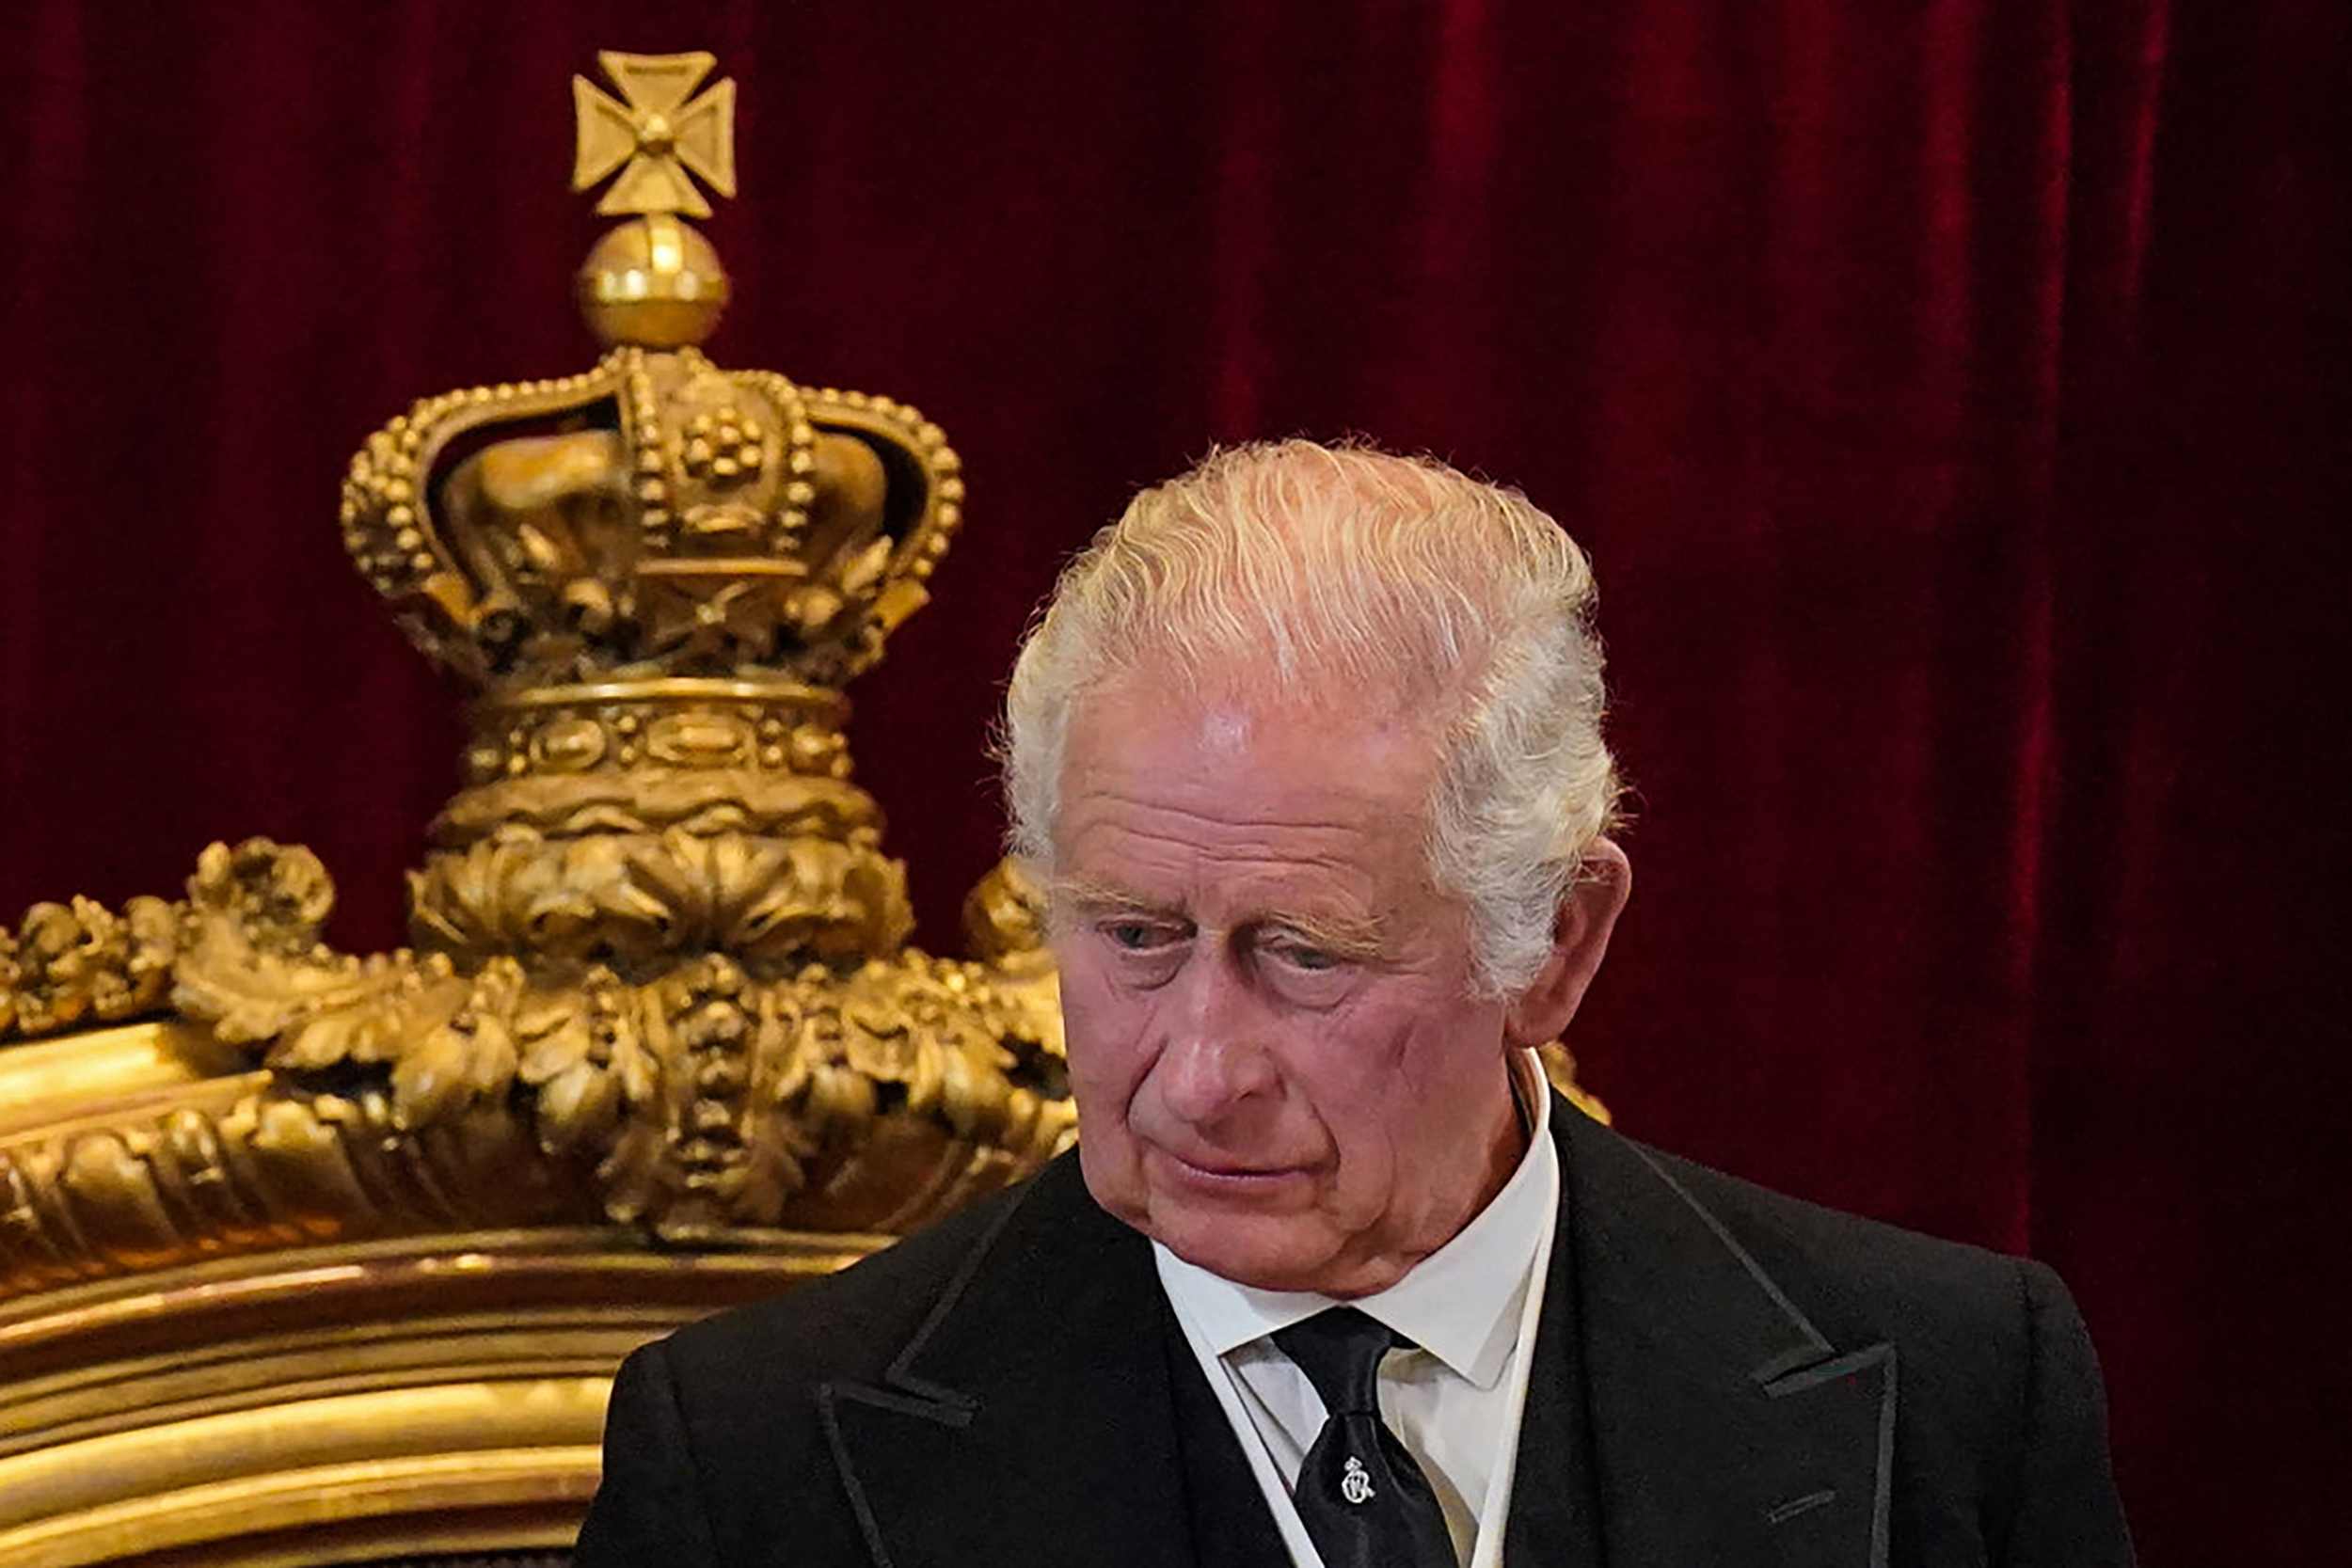 King Charles III during a meeting of the Accession Council inside St James's Palace in London on September 10, 2022 | Source: Getty Images